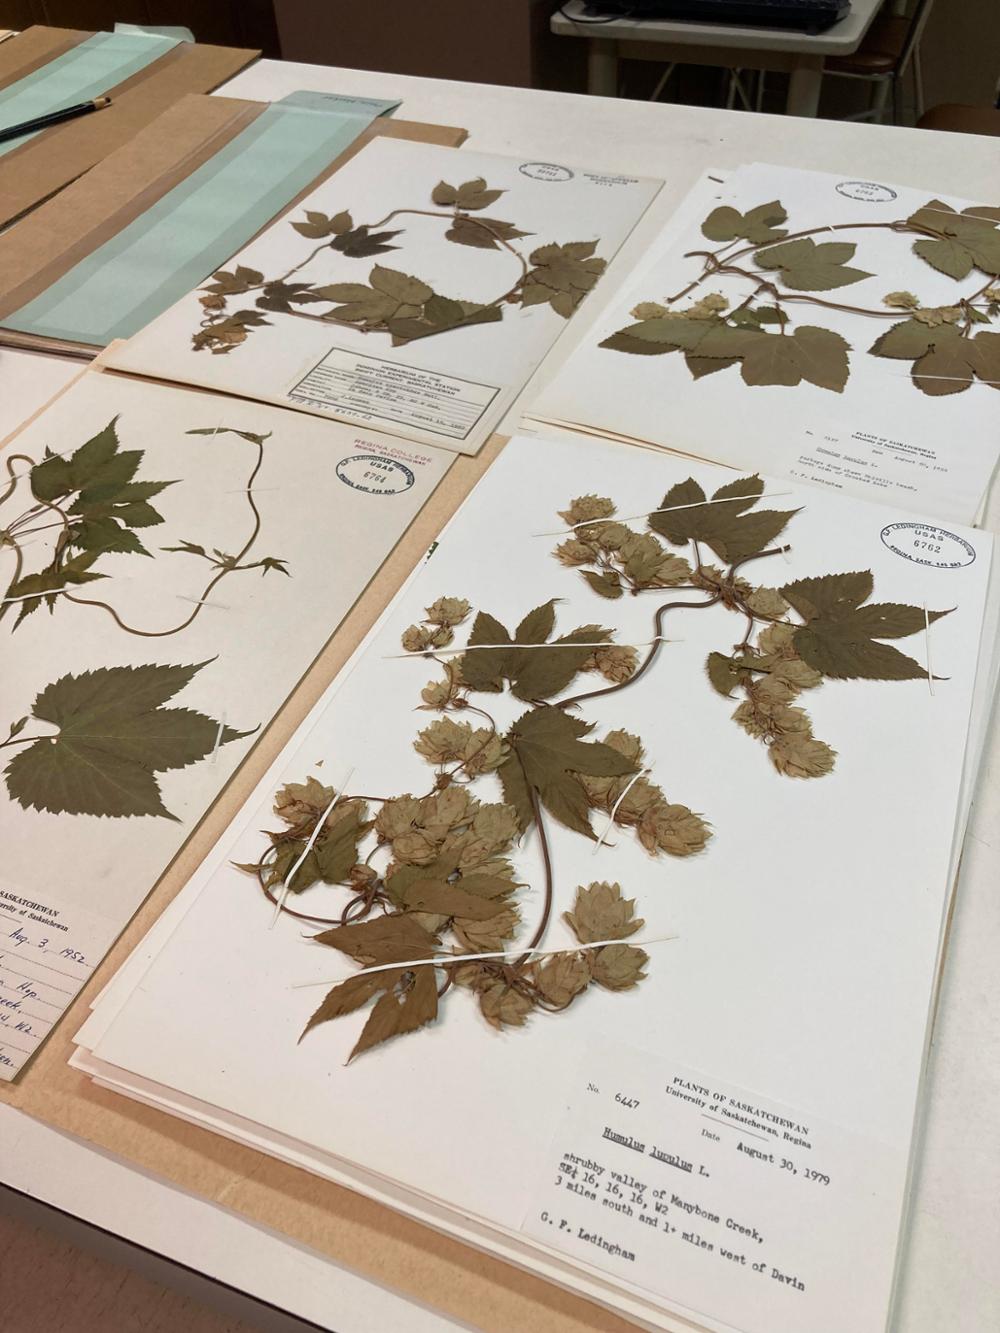 Common hop plant specimens mounted on herbarium sheets.